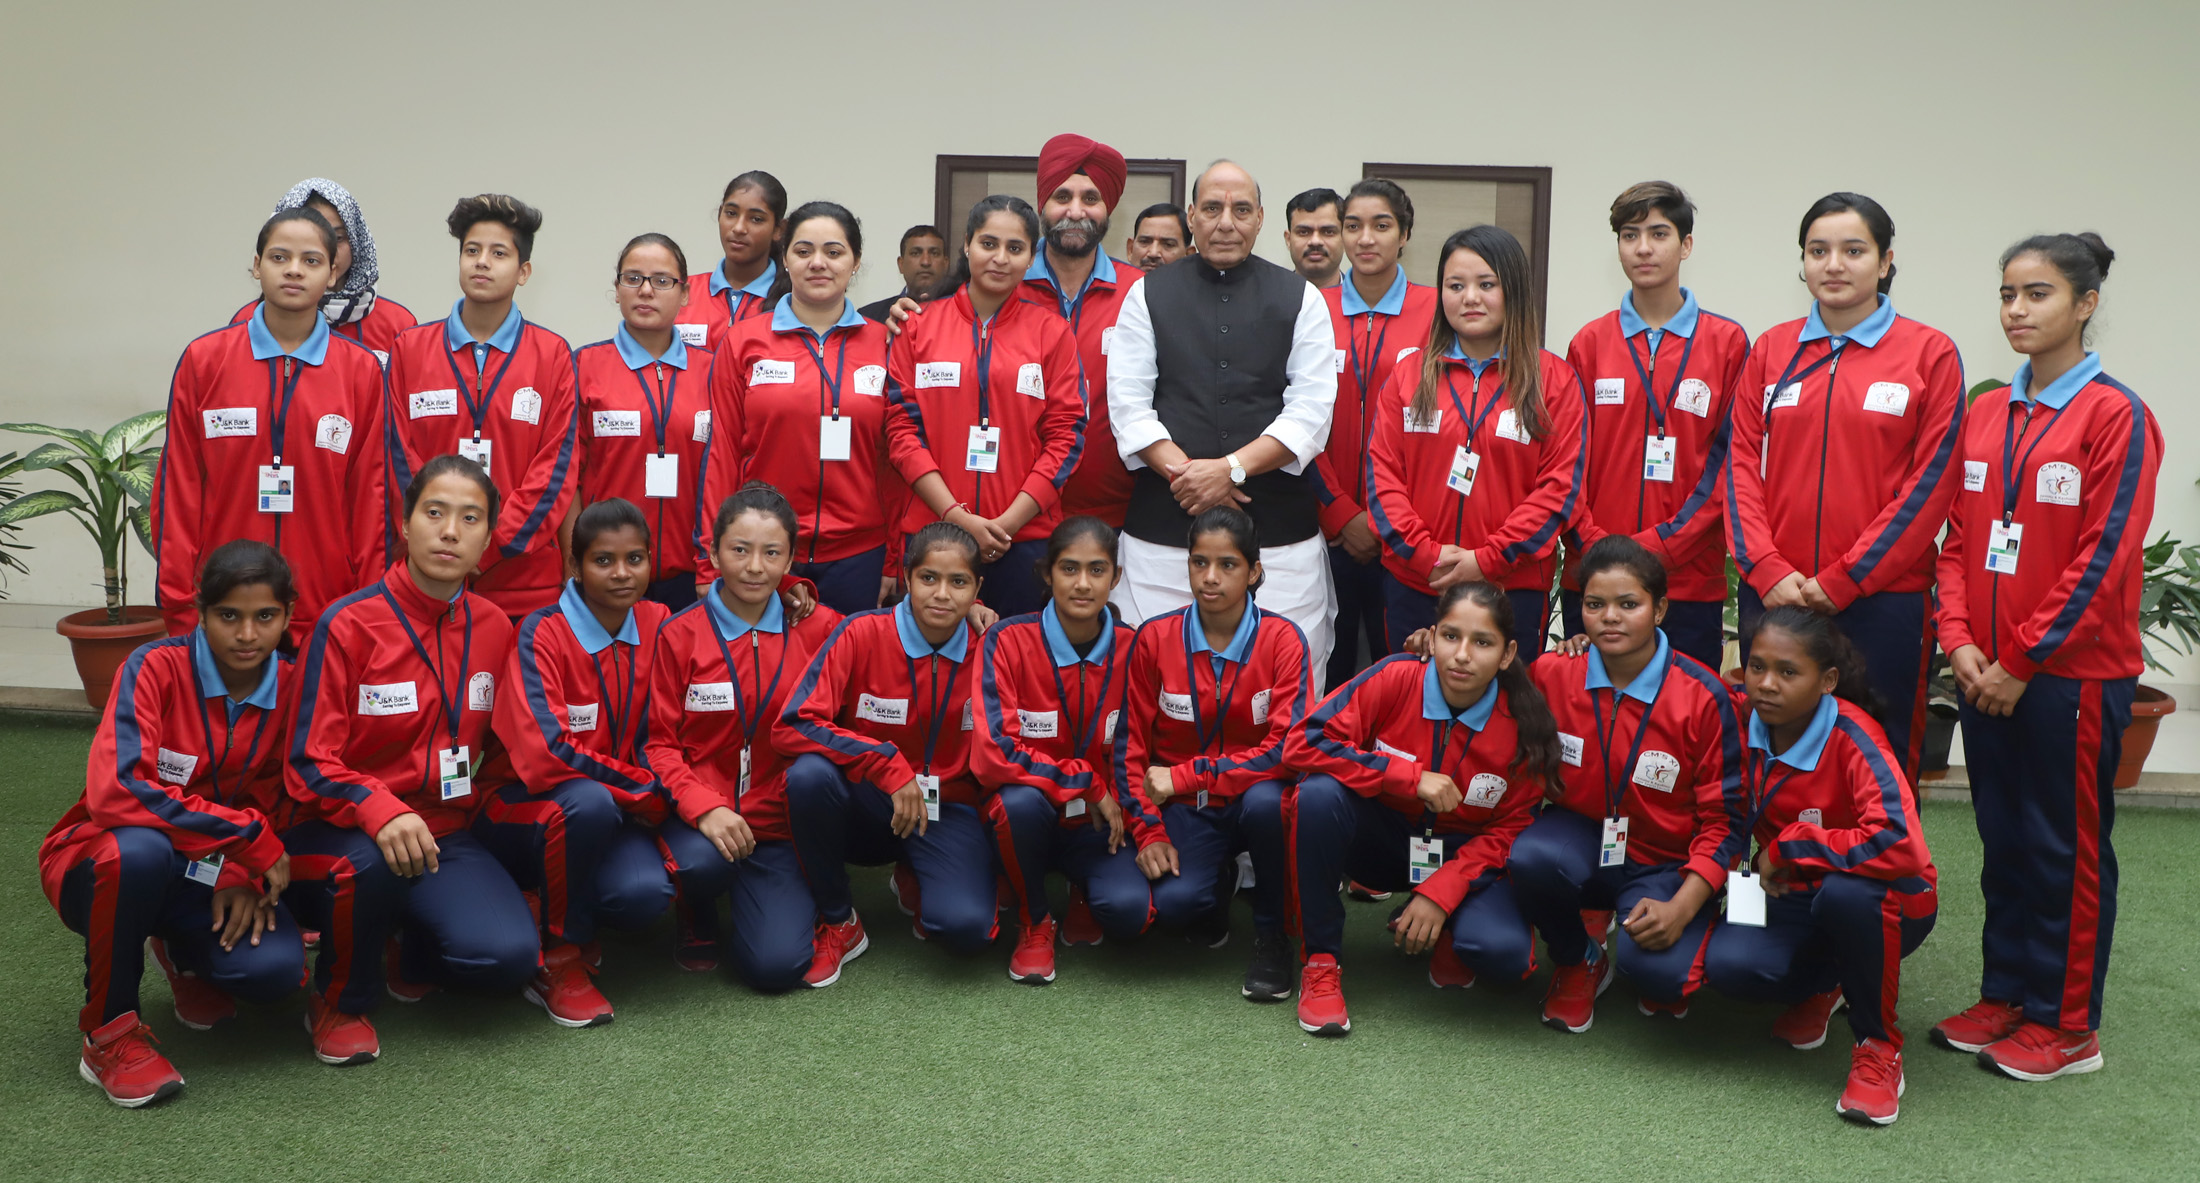 Women Football players from J&K in a group photograph with the Union Home Minister, Shri Rajnath Singh, in New Delhi on December 05, 2017.